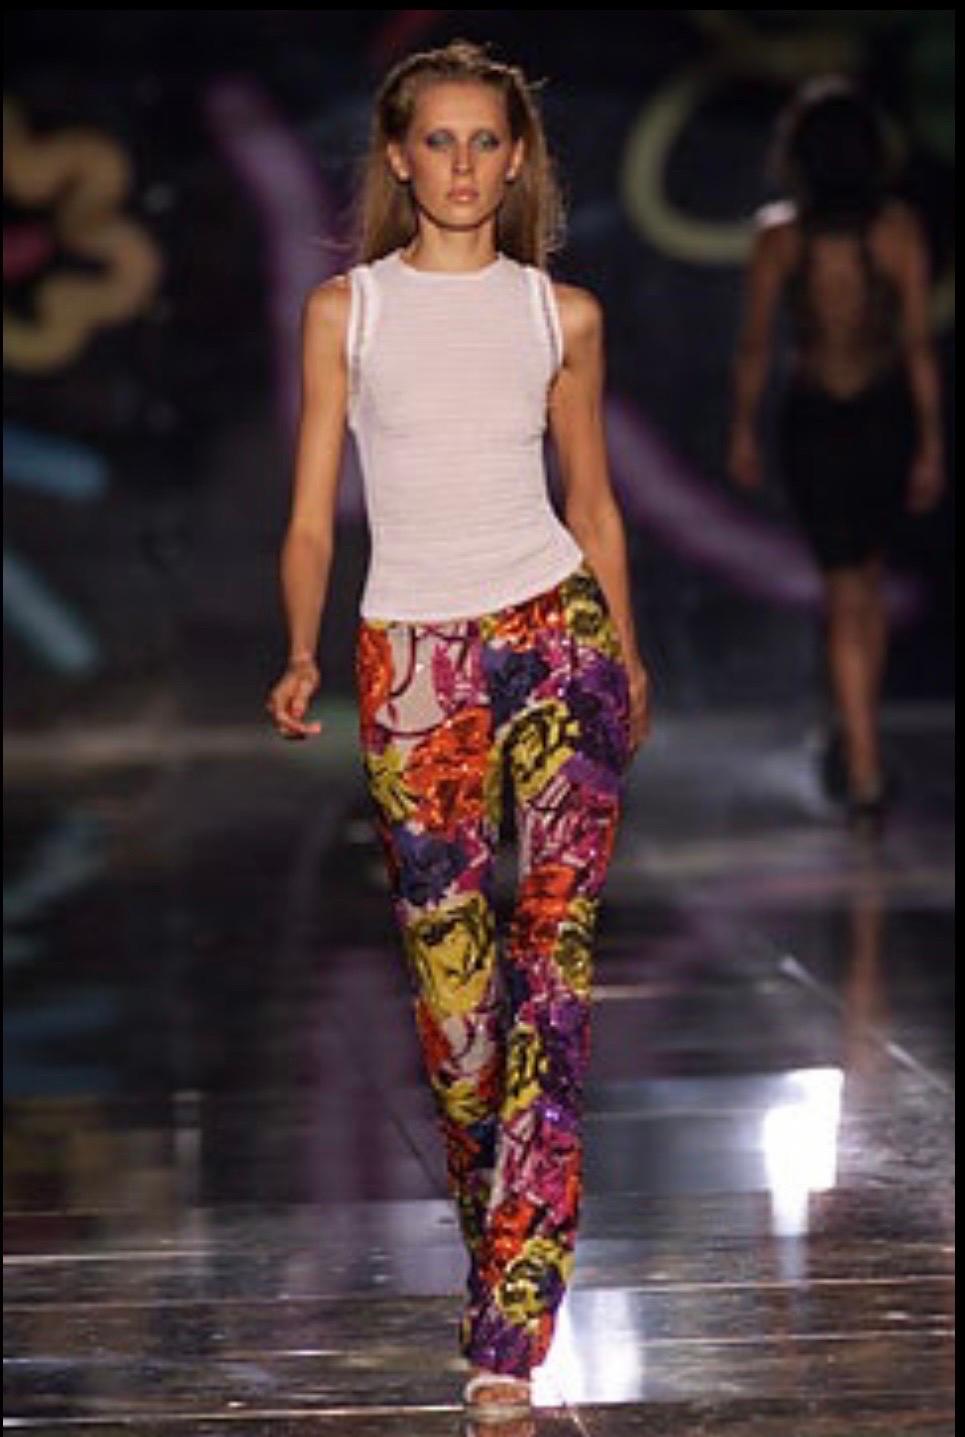 Gianni Versace Couture vivid eye-catching floral printed beaded pants from the Spring Summer 2002 collection designed by Donatella Versace.
Intricate beaded embellishments on the lower portion of the pants.
Made in Italy
Zip back closure

Size: